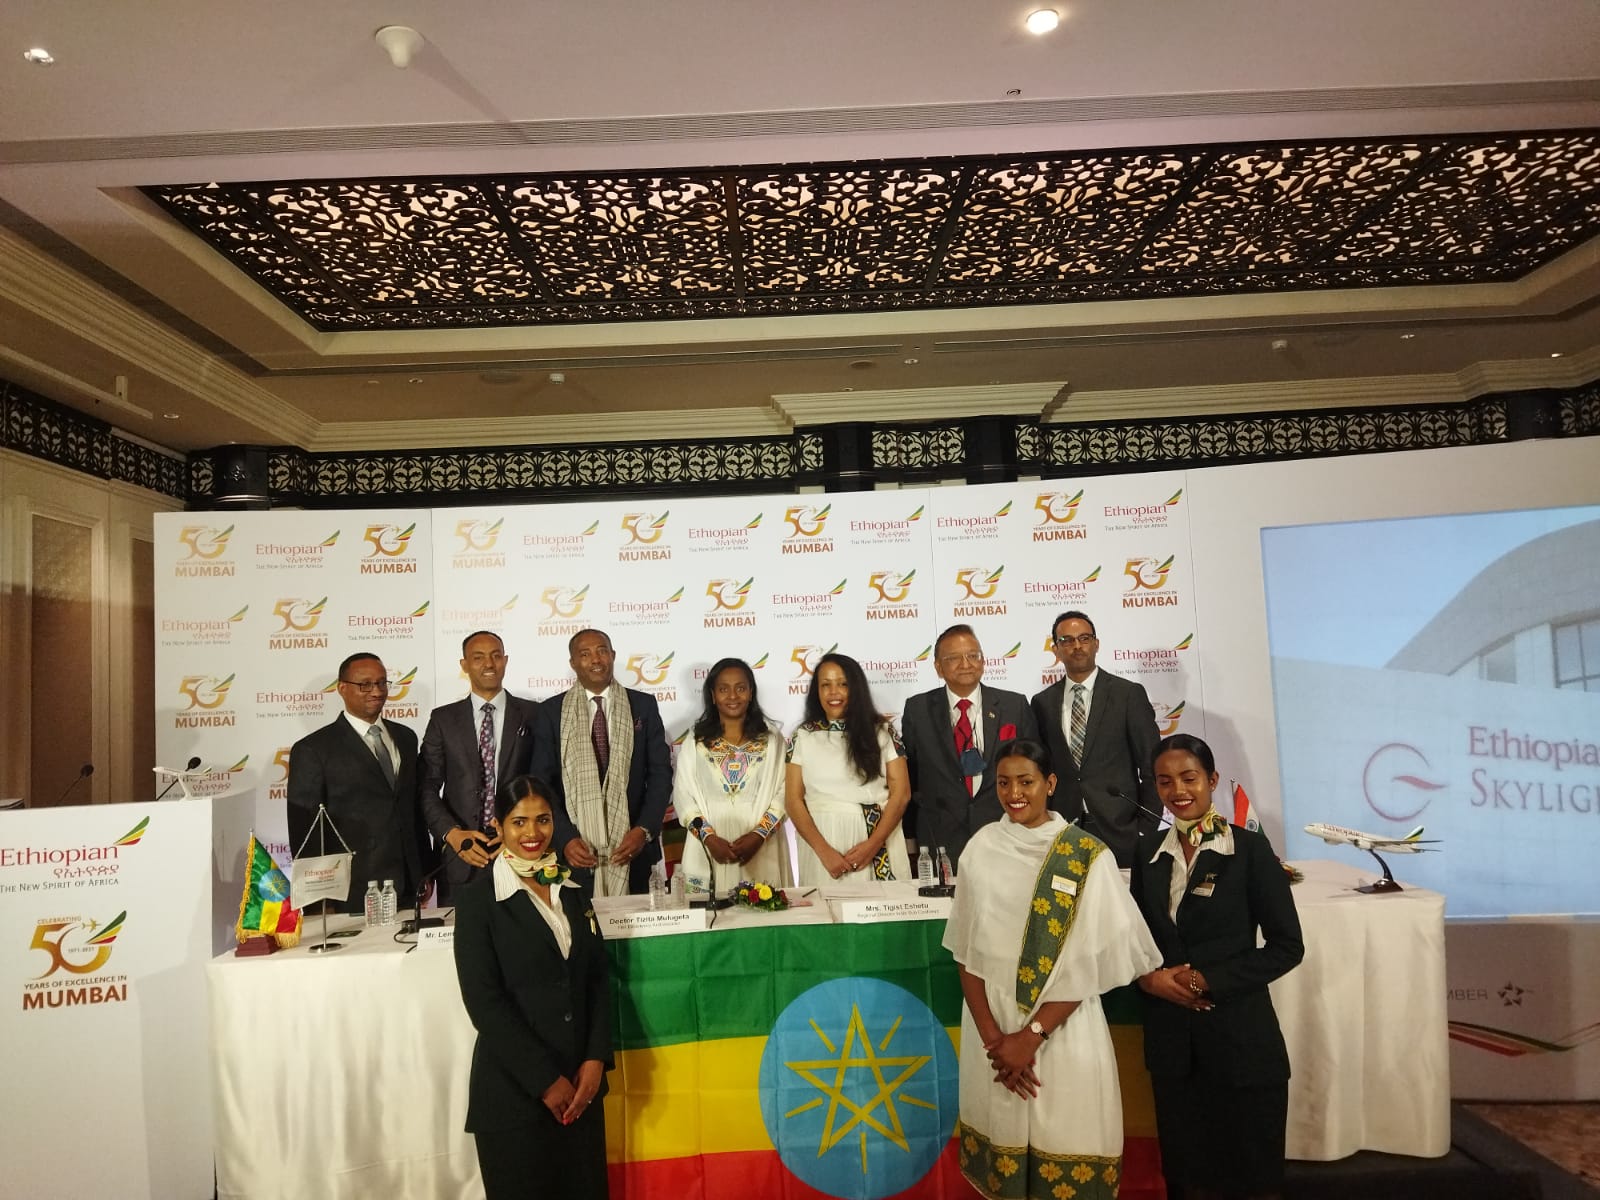 Ethiopian Airlines to connect Chennai with three weekly flights from July 2